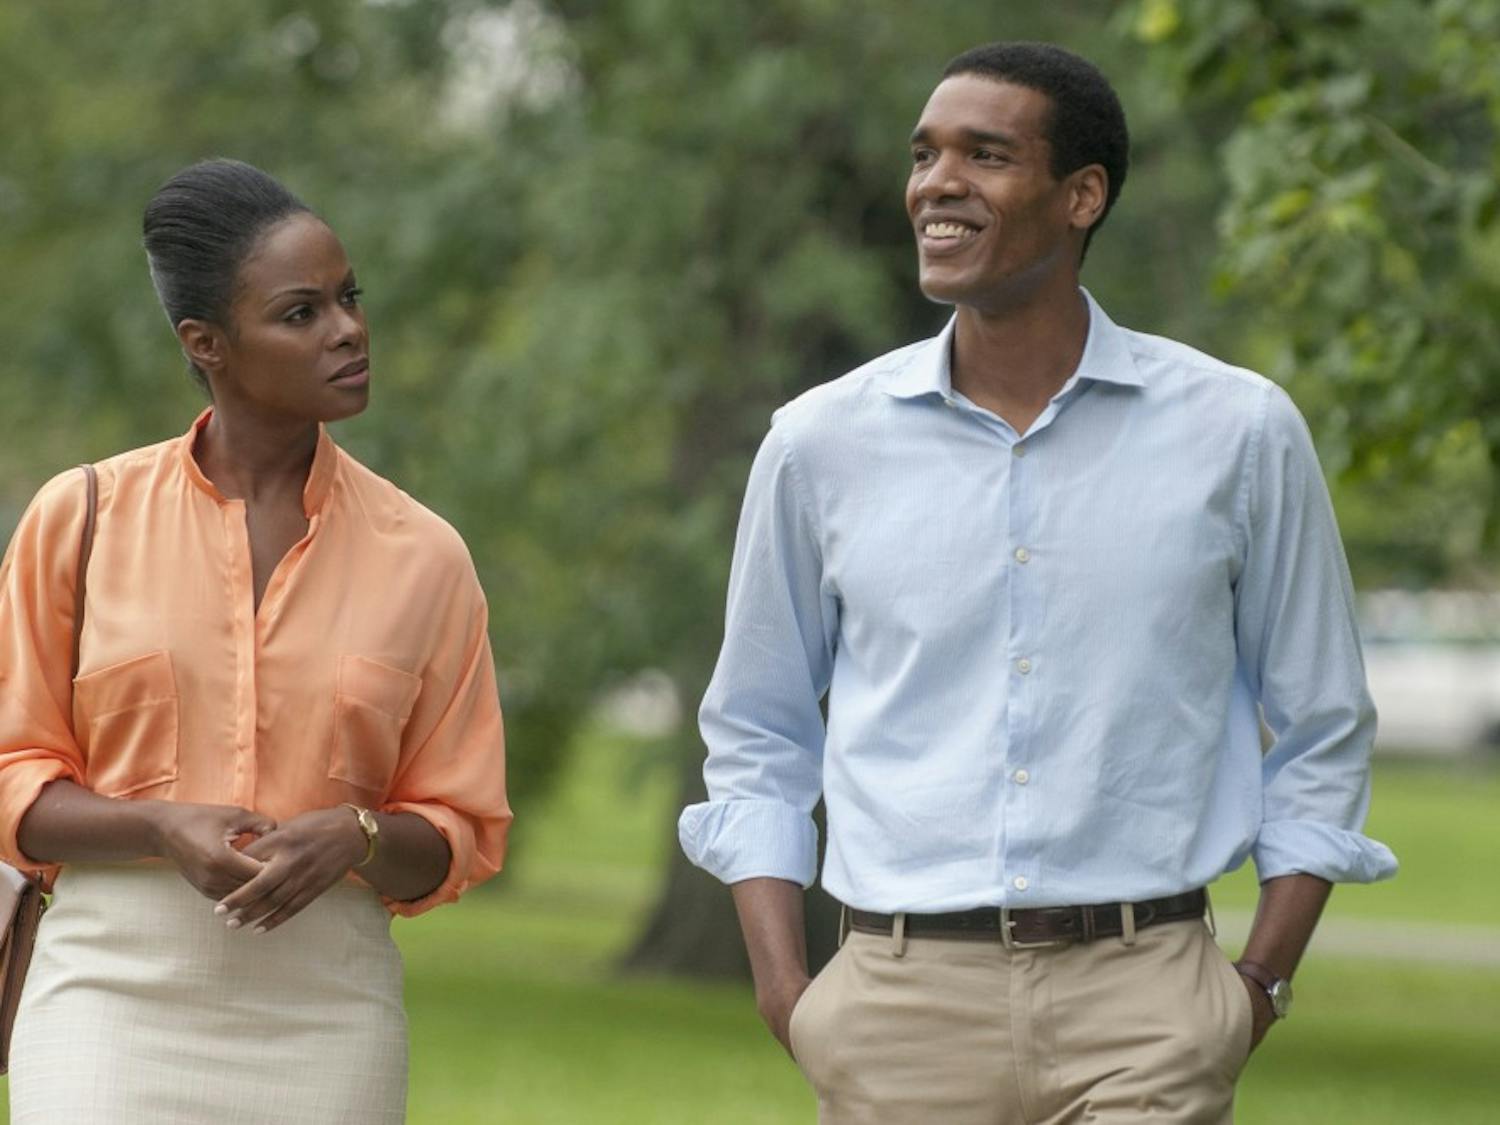 Tika Sumpter and Parker Sawyers in "Southside with You." (Matt Dinerstein/Miramax/Roadside Attractions) 